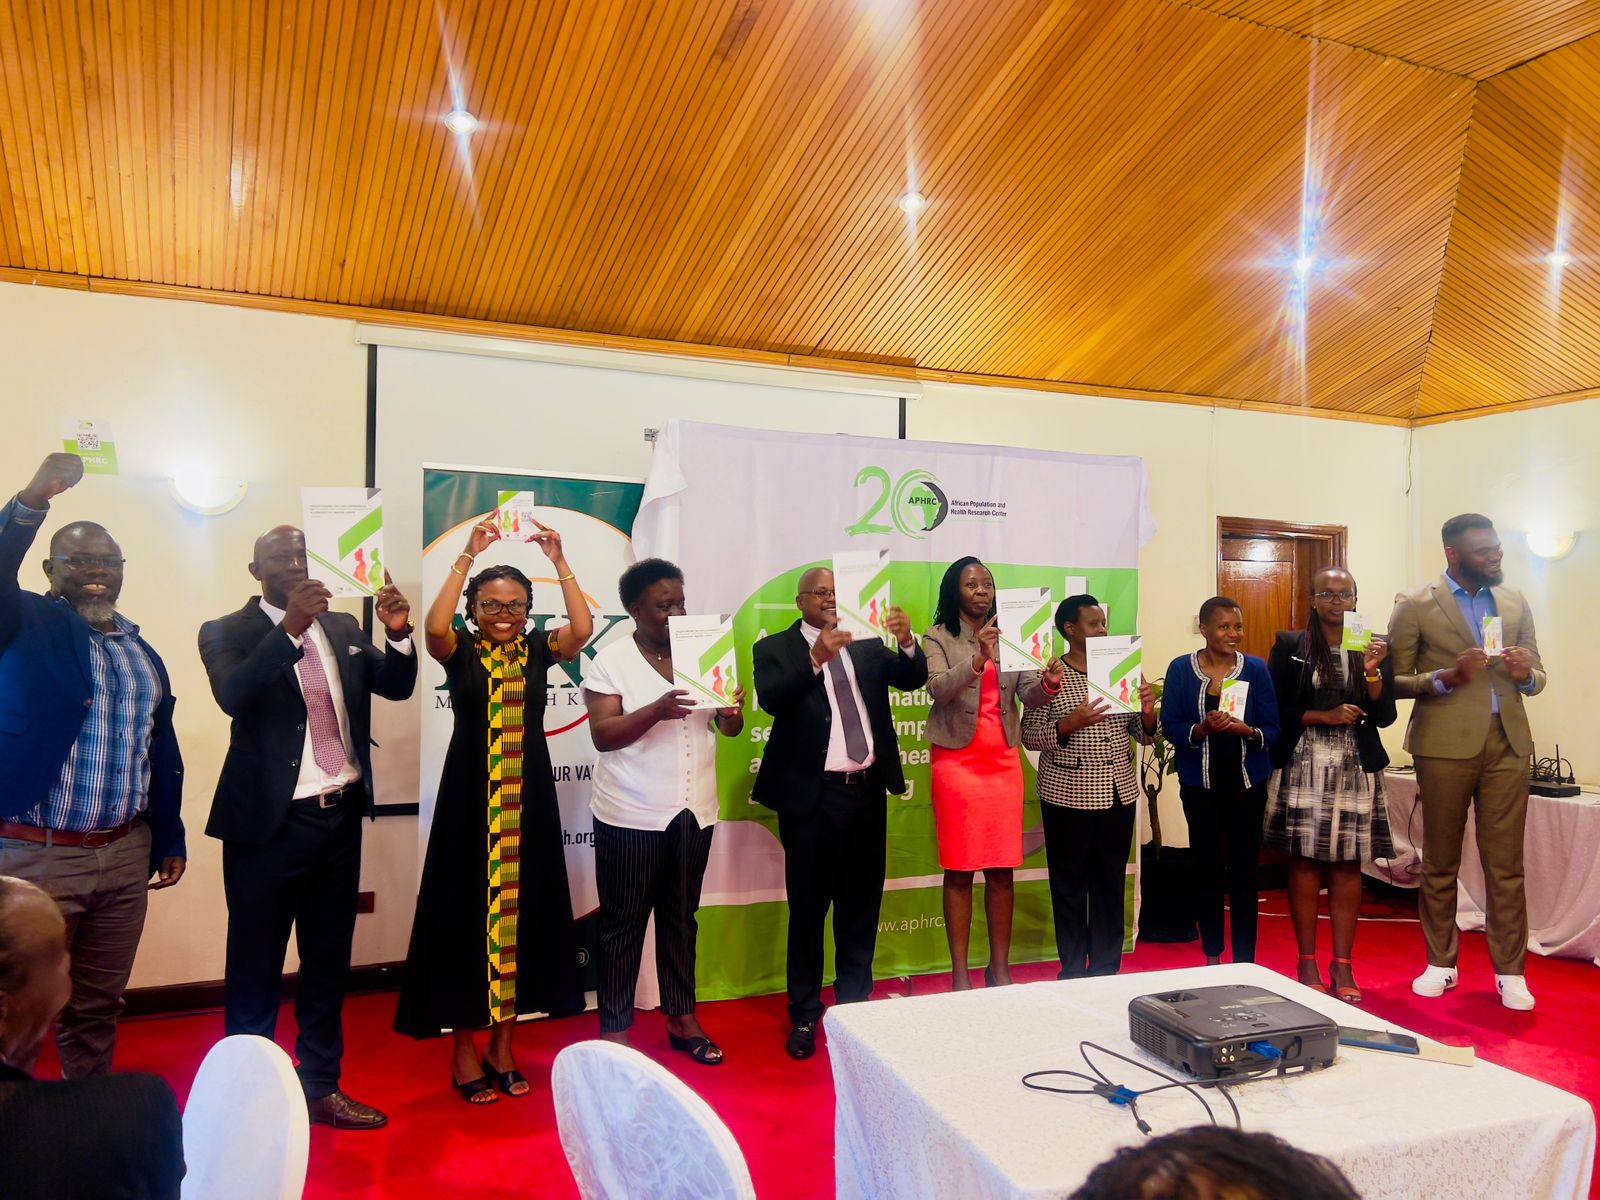 African Population and Health Research Center in collaboration with Miss Koch Kenya released a comprehensive study on the Lived Experiences of Pregnant and Parenting Adolescents in Korogocho, Nairobi, Kenya.